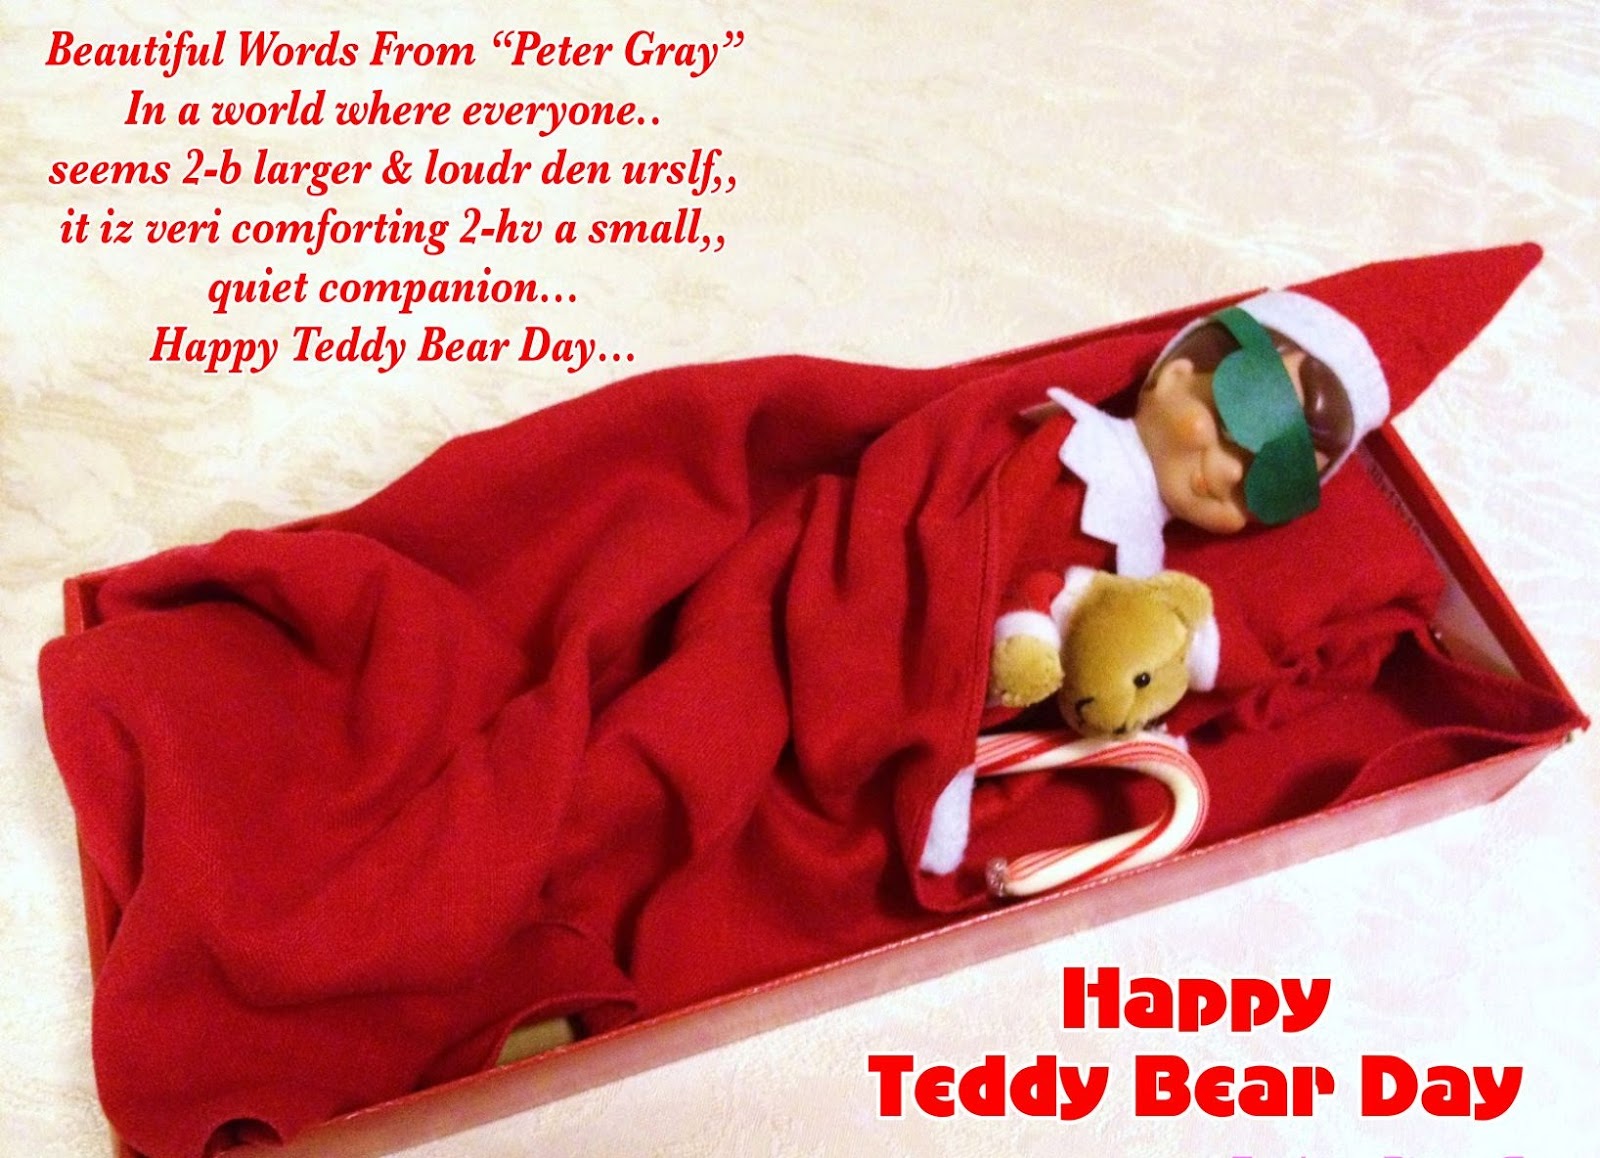 I were a cell I vish I were a cell in ur blood so I wld b sure I was some where in ur hrt Happy Teddy Bear Day